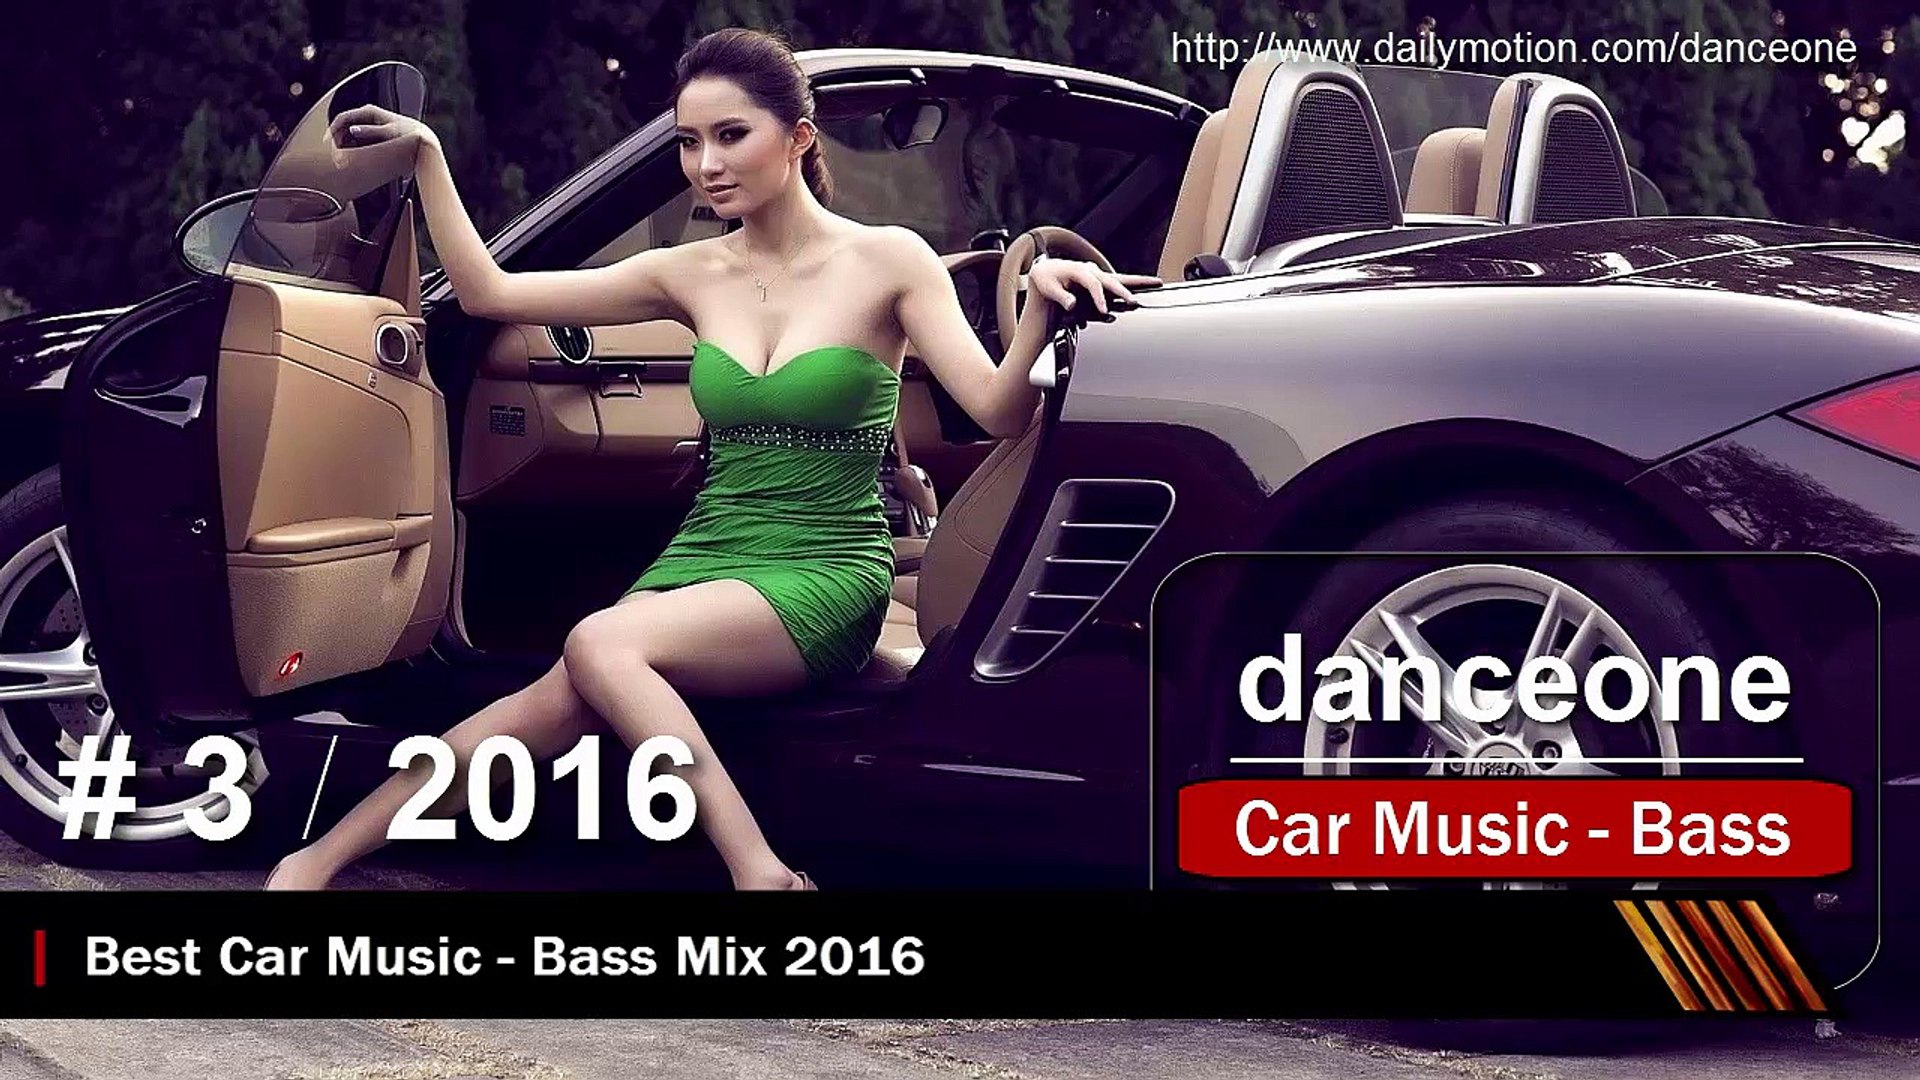 ♫▻#3 - Best Car Music - Bass Mix 2016 - danceone - video Dailymotion